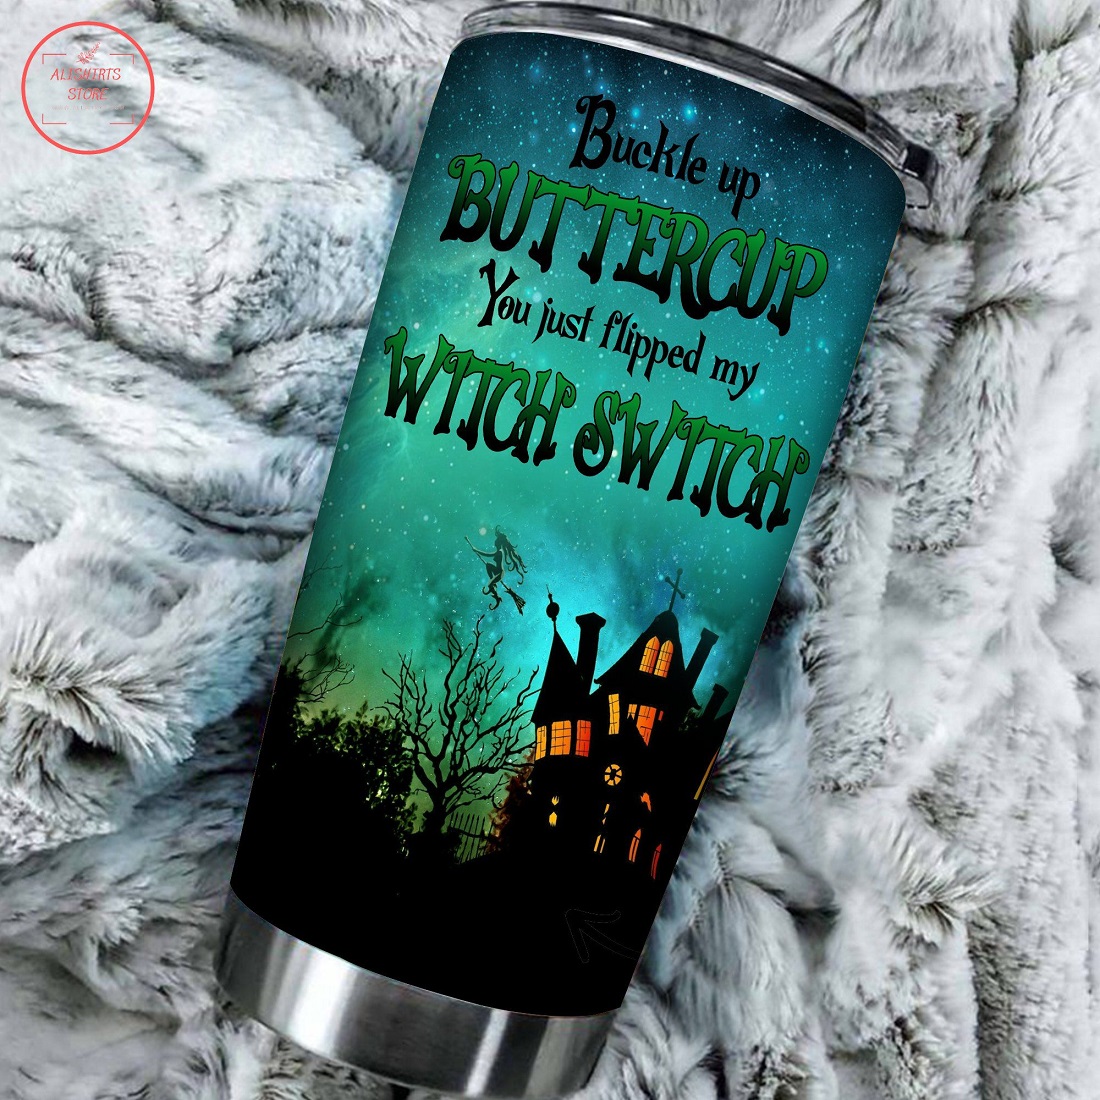 Buckle up buttercup you just flipped my witch switch Tumbler